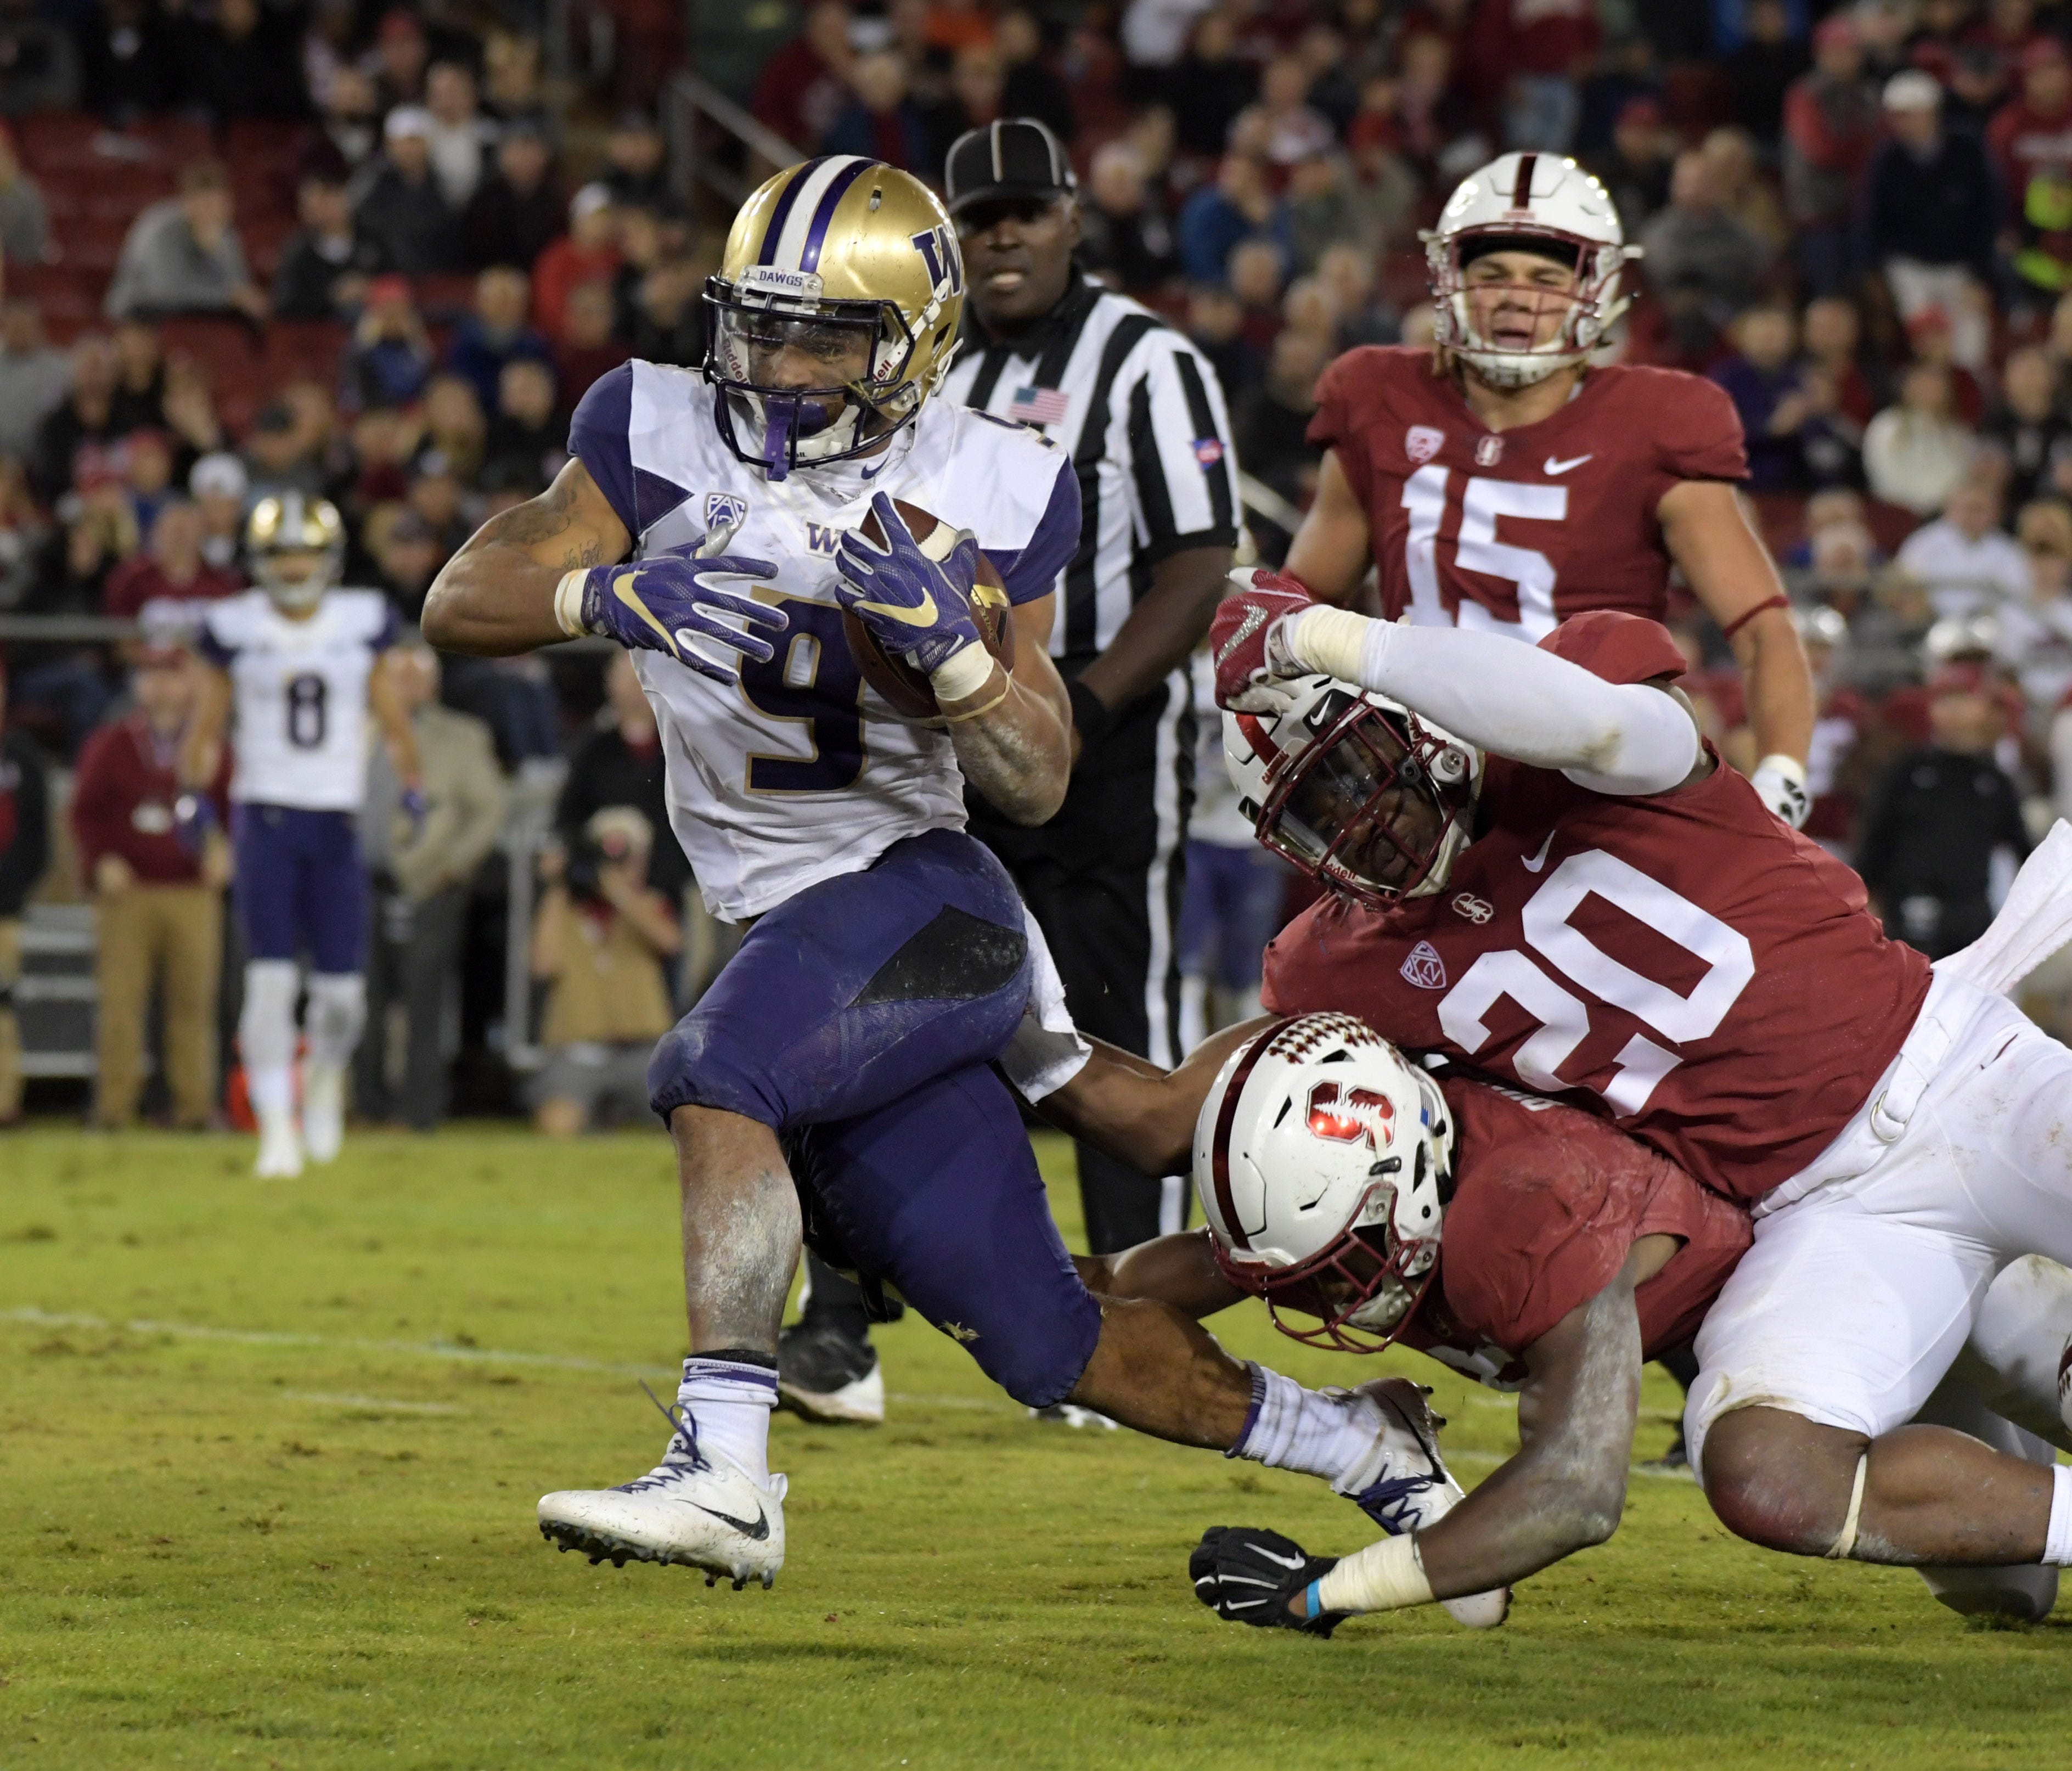 Washington Huskies running back Myles Gaskin (9) scores a touchdown in the second quarter against the Stanford Cardinal.